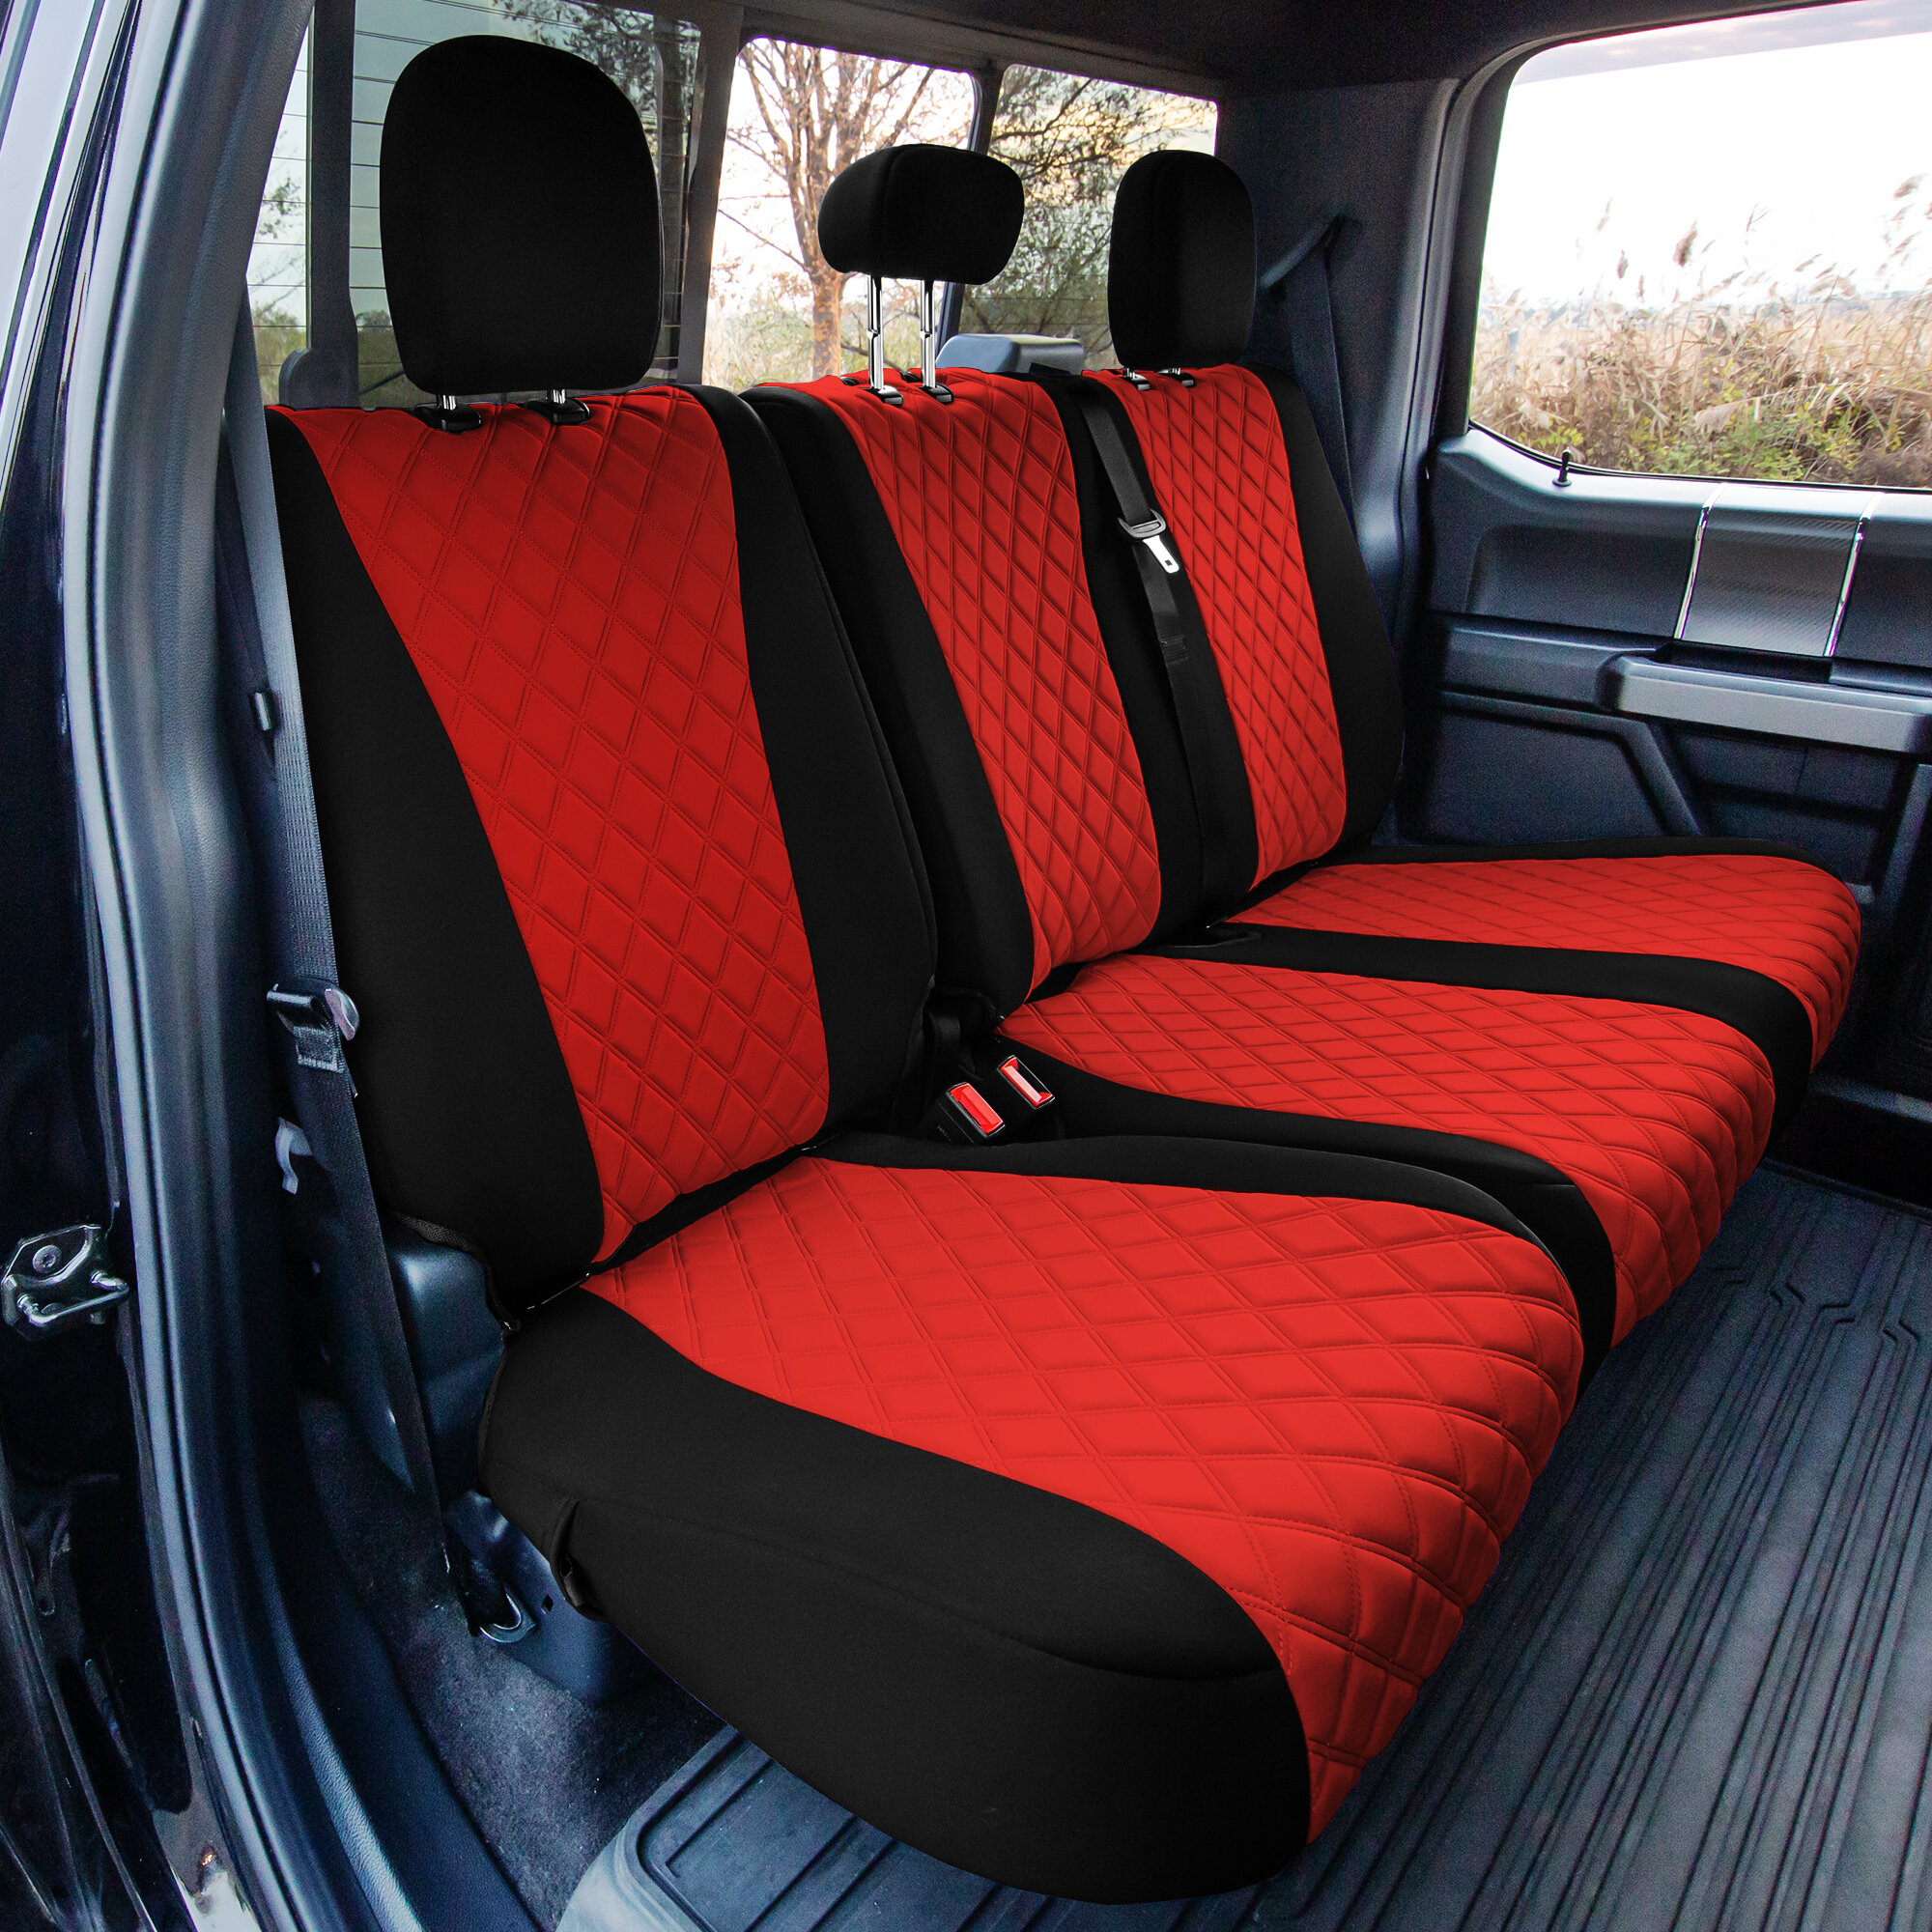 KAHOOL Car Seat Cover For Audi A1 Auto Accessories Interior (1seat